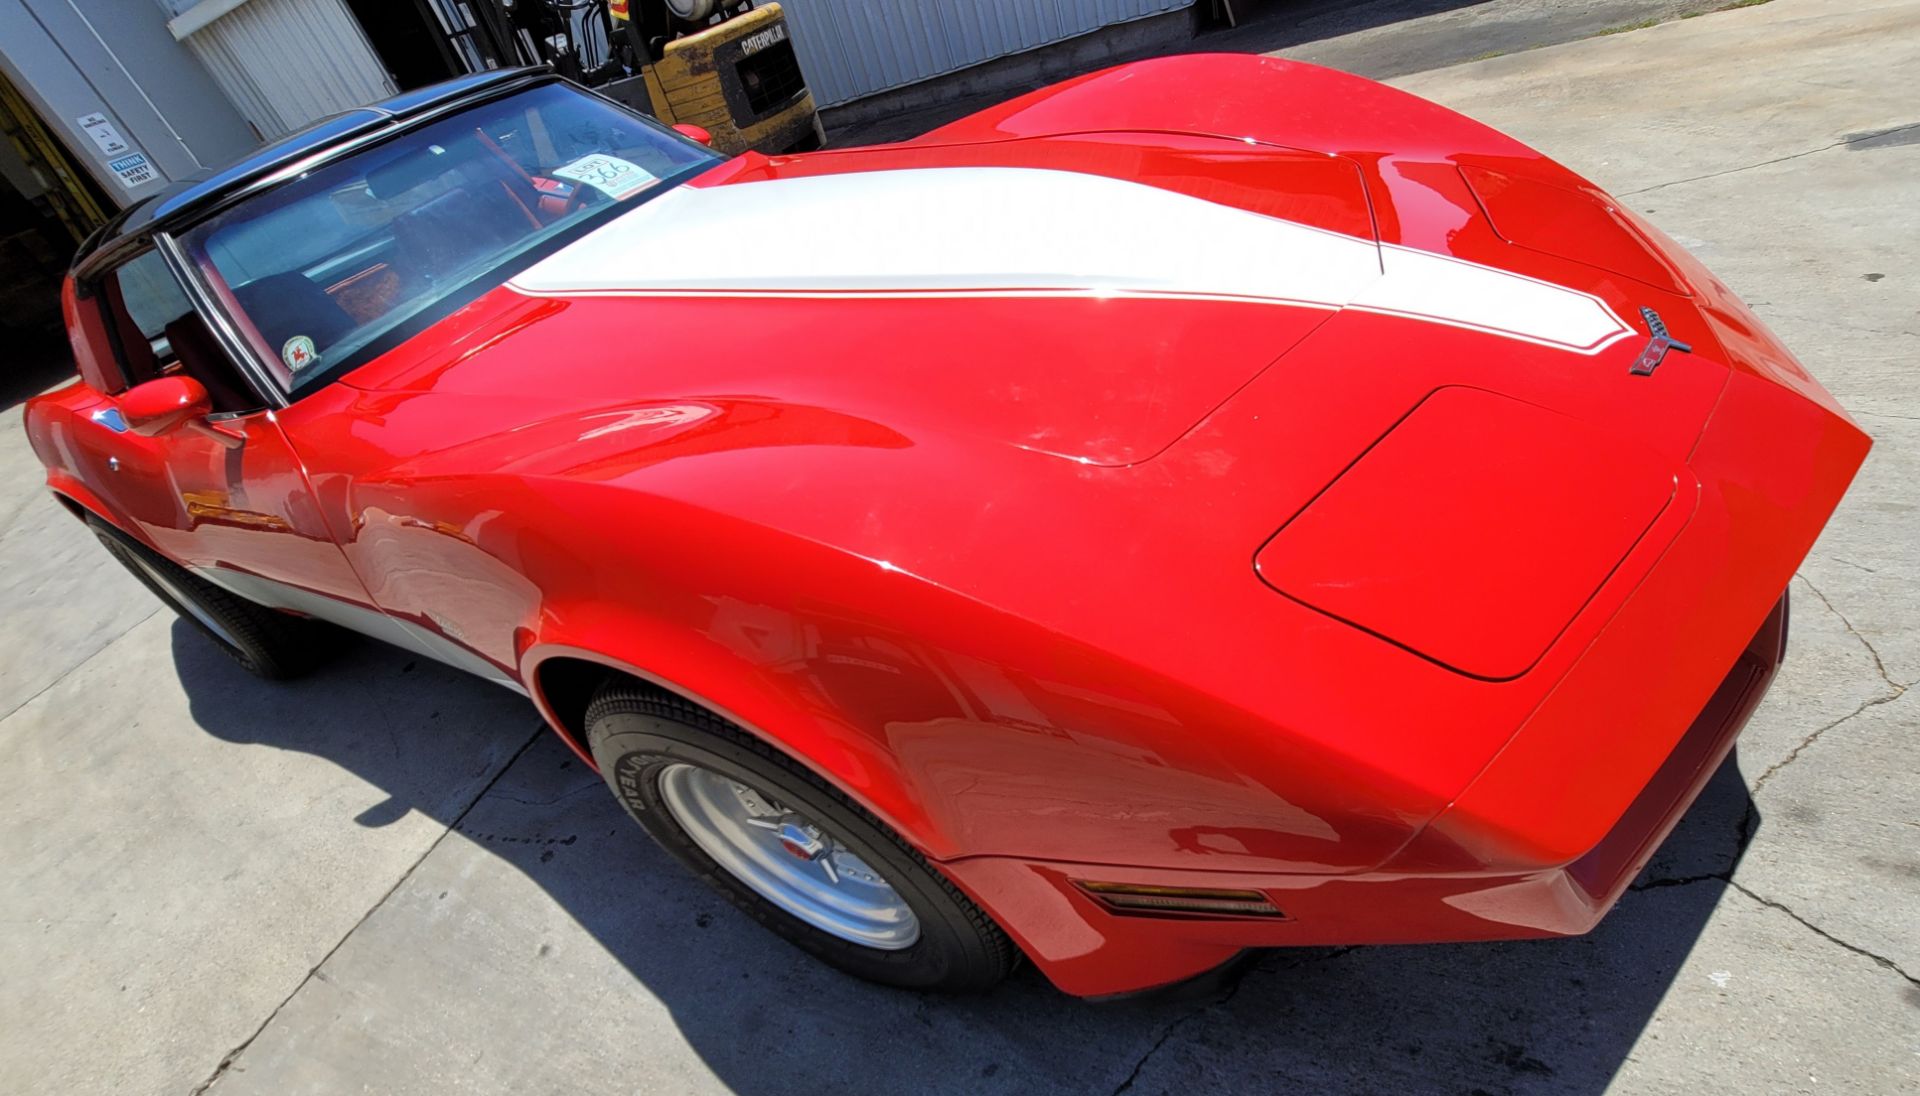 1980 CHEVROLET CORVETTE, WAS VIC EDELBROCK'S PERSONAL CAR BOUGHT FOR R&D, RED INTERIOR, TITLE ONLY. - Image 51 of 70